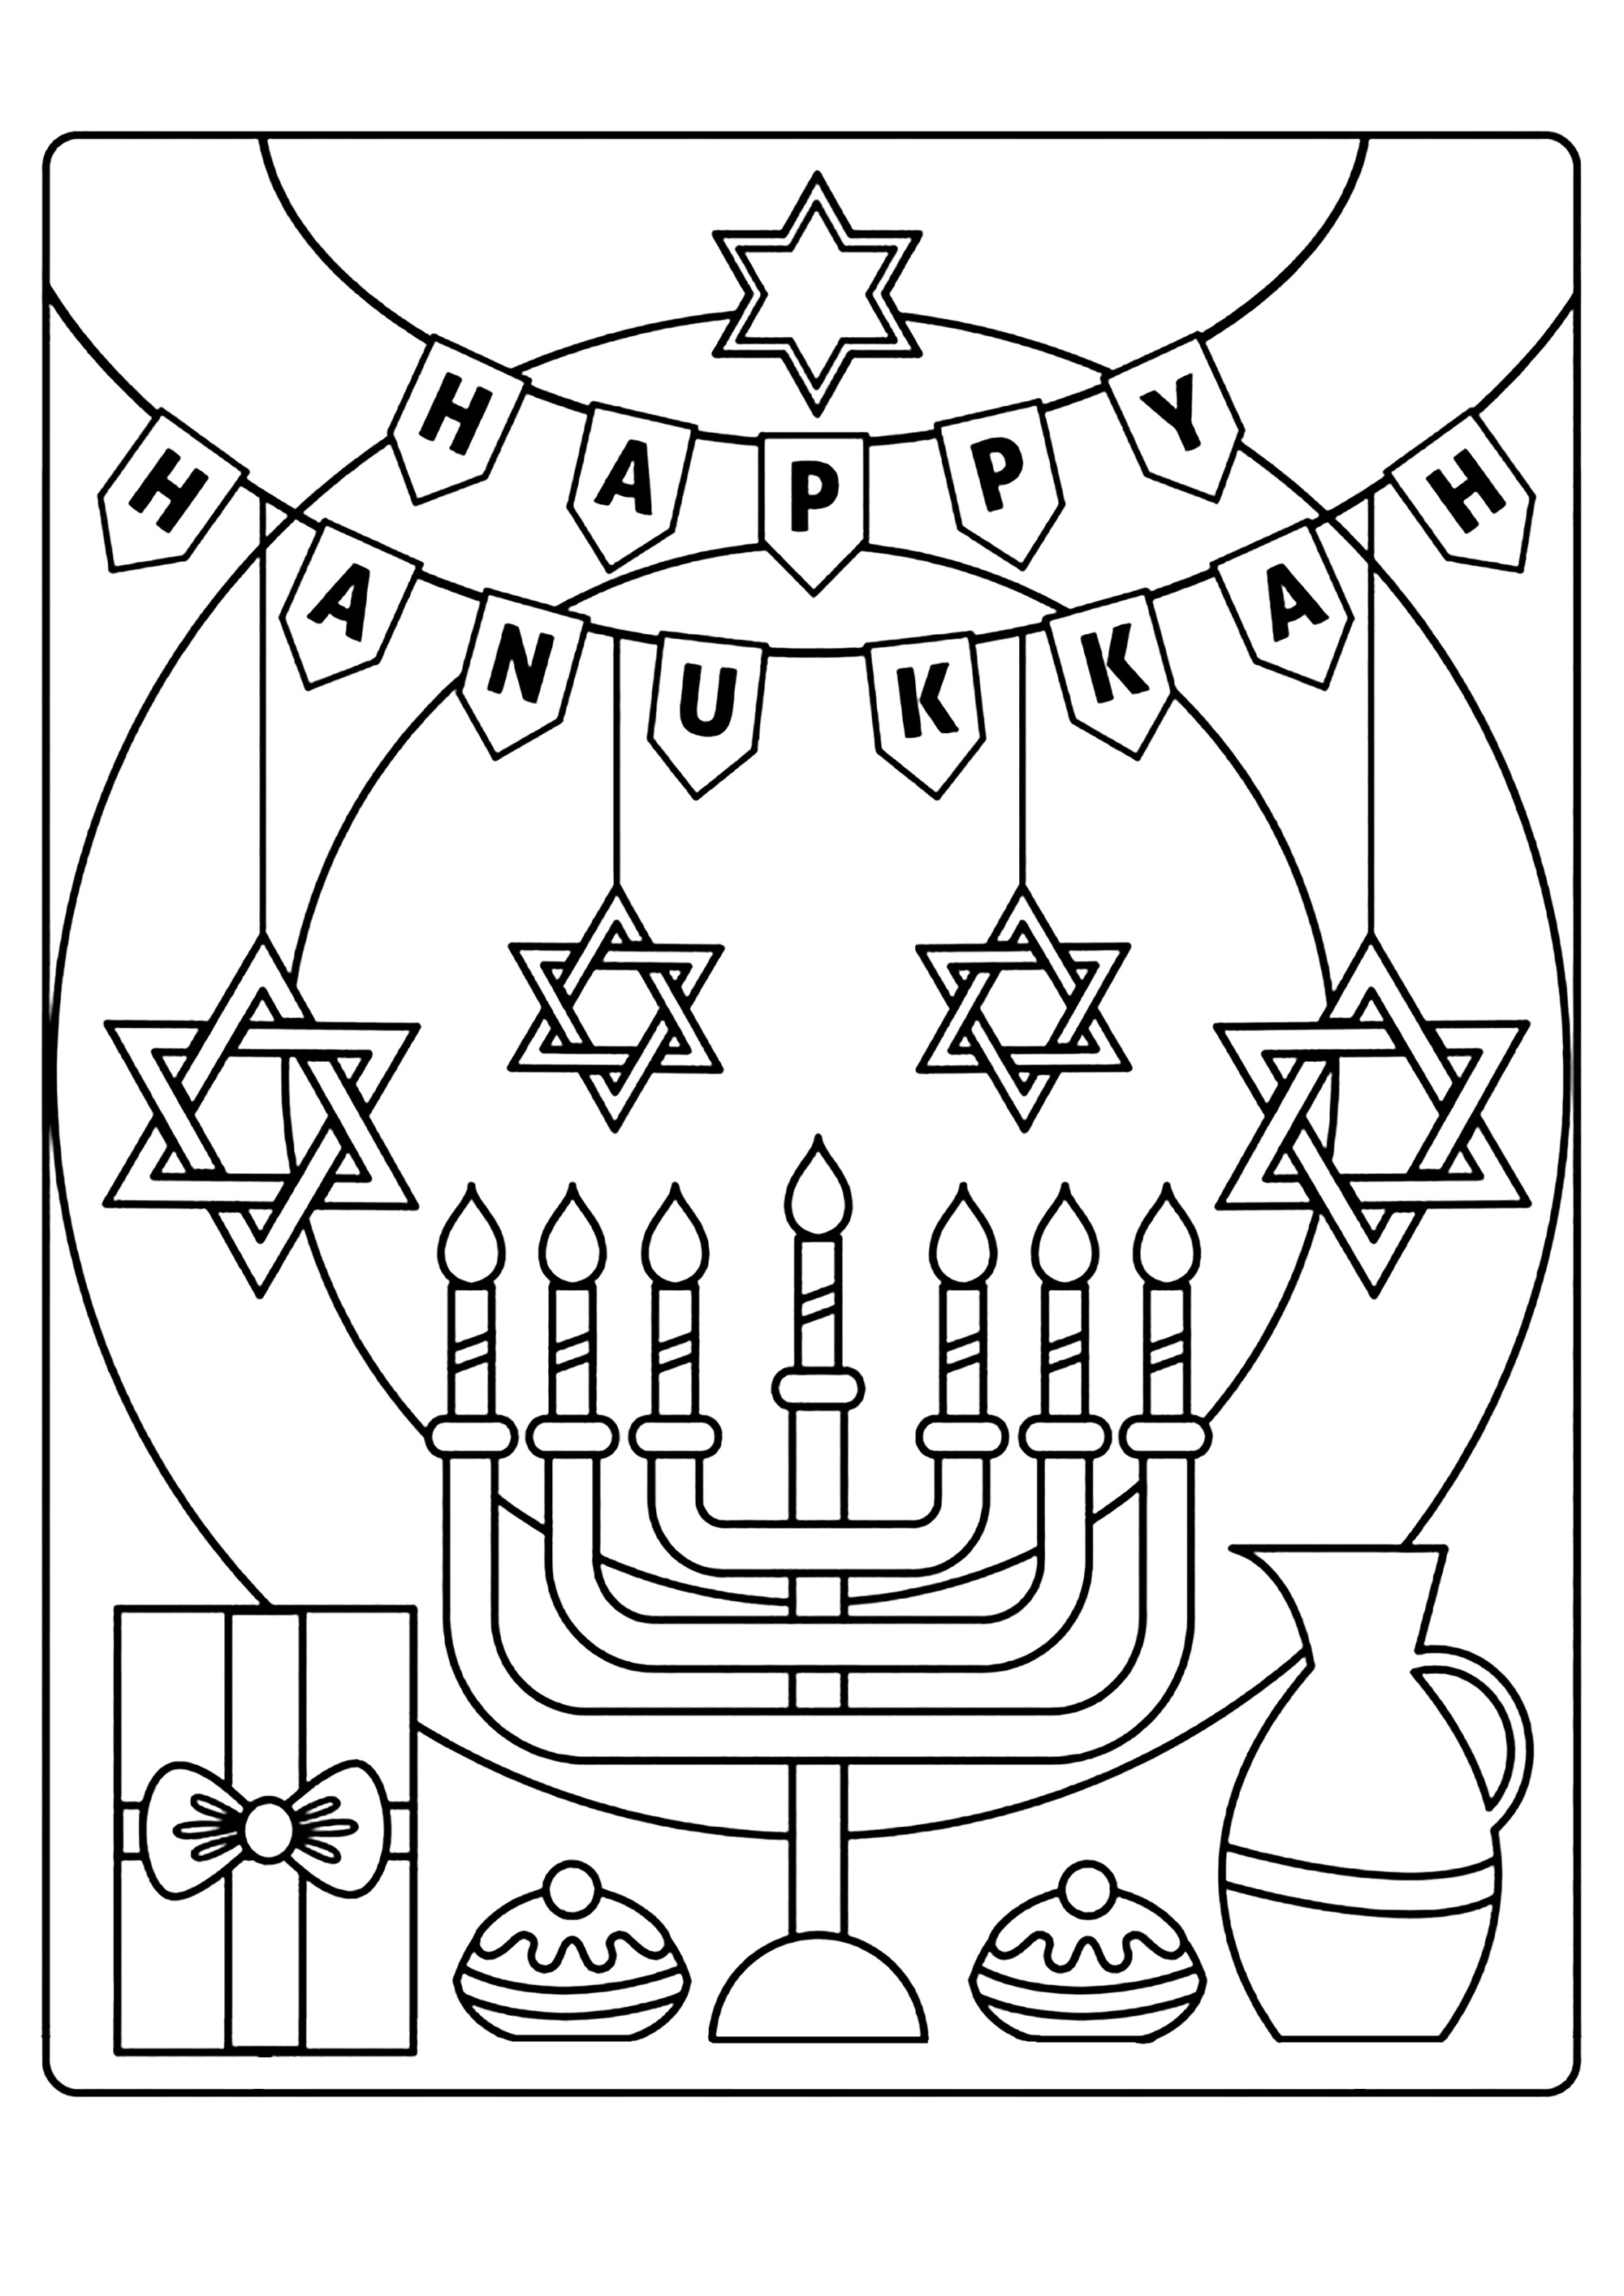 Happy Hanukkah. Hanukkah is a Jewish festival of rabbinic institution, commemorating the reinauguration of the altar of offerings in Jerusalem's Second Temple.